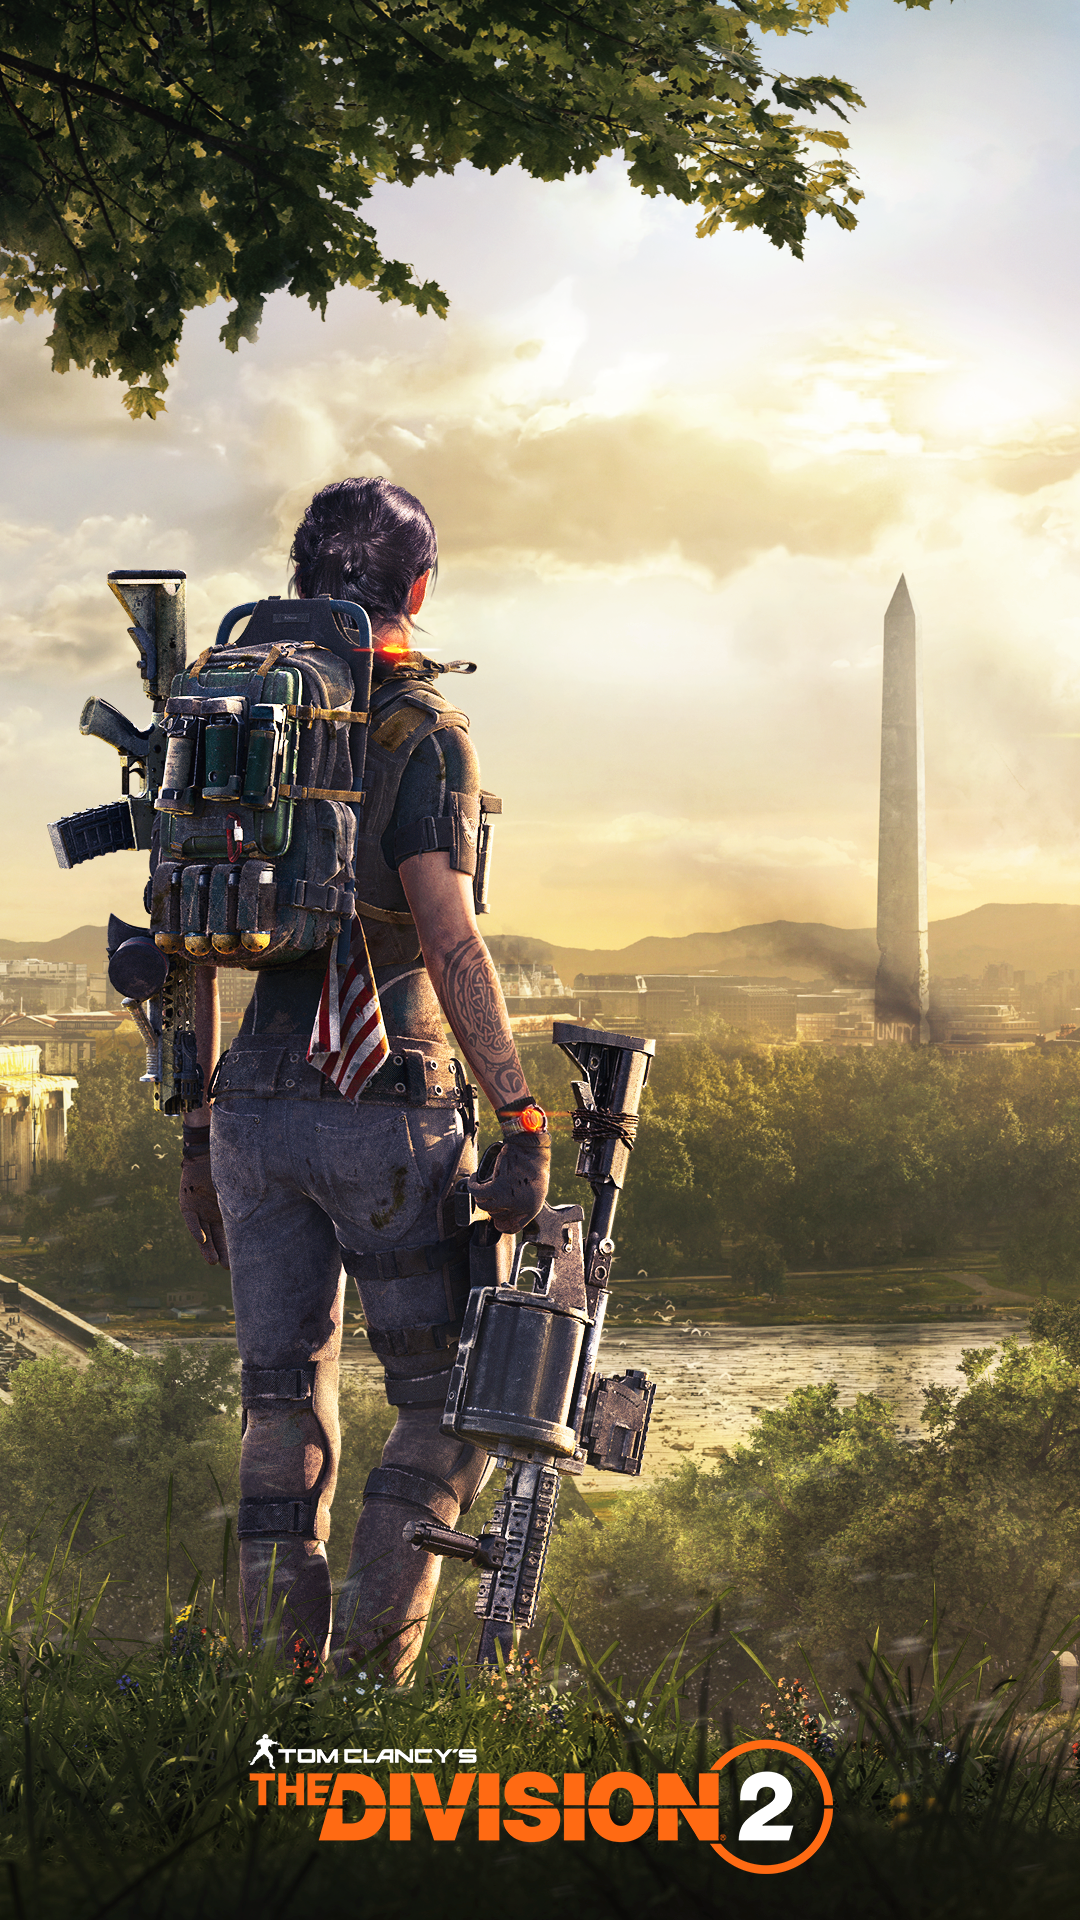 General 1080x1920 Tom Clancy's The Division 2 Ubisoft video games Tom Clancy's The Division girls with guns standing outdoors women outdoors portrait display clouds sky gun title Washington, D.C. tattoo backpacks American flag water grass leaves sunlight short sleeves